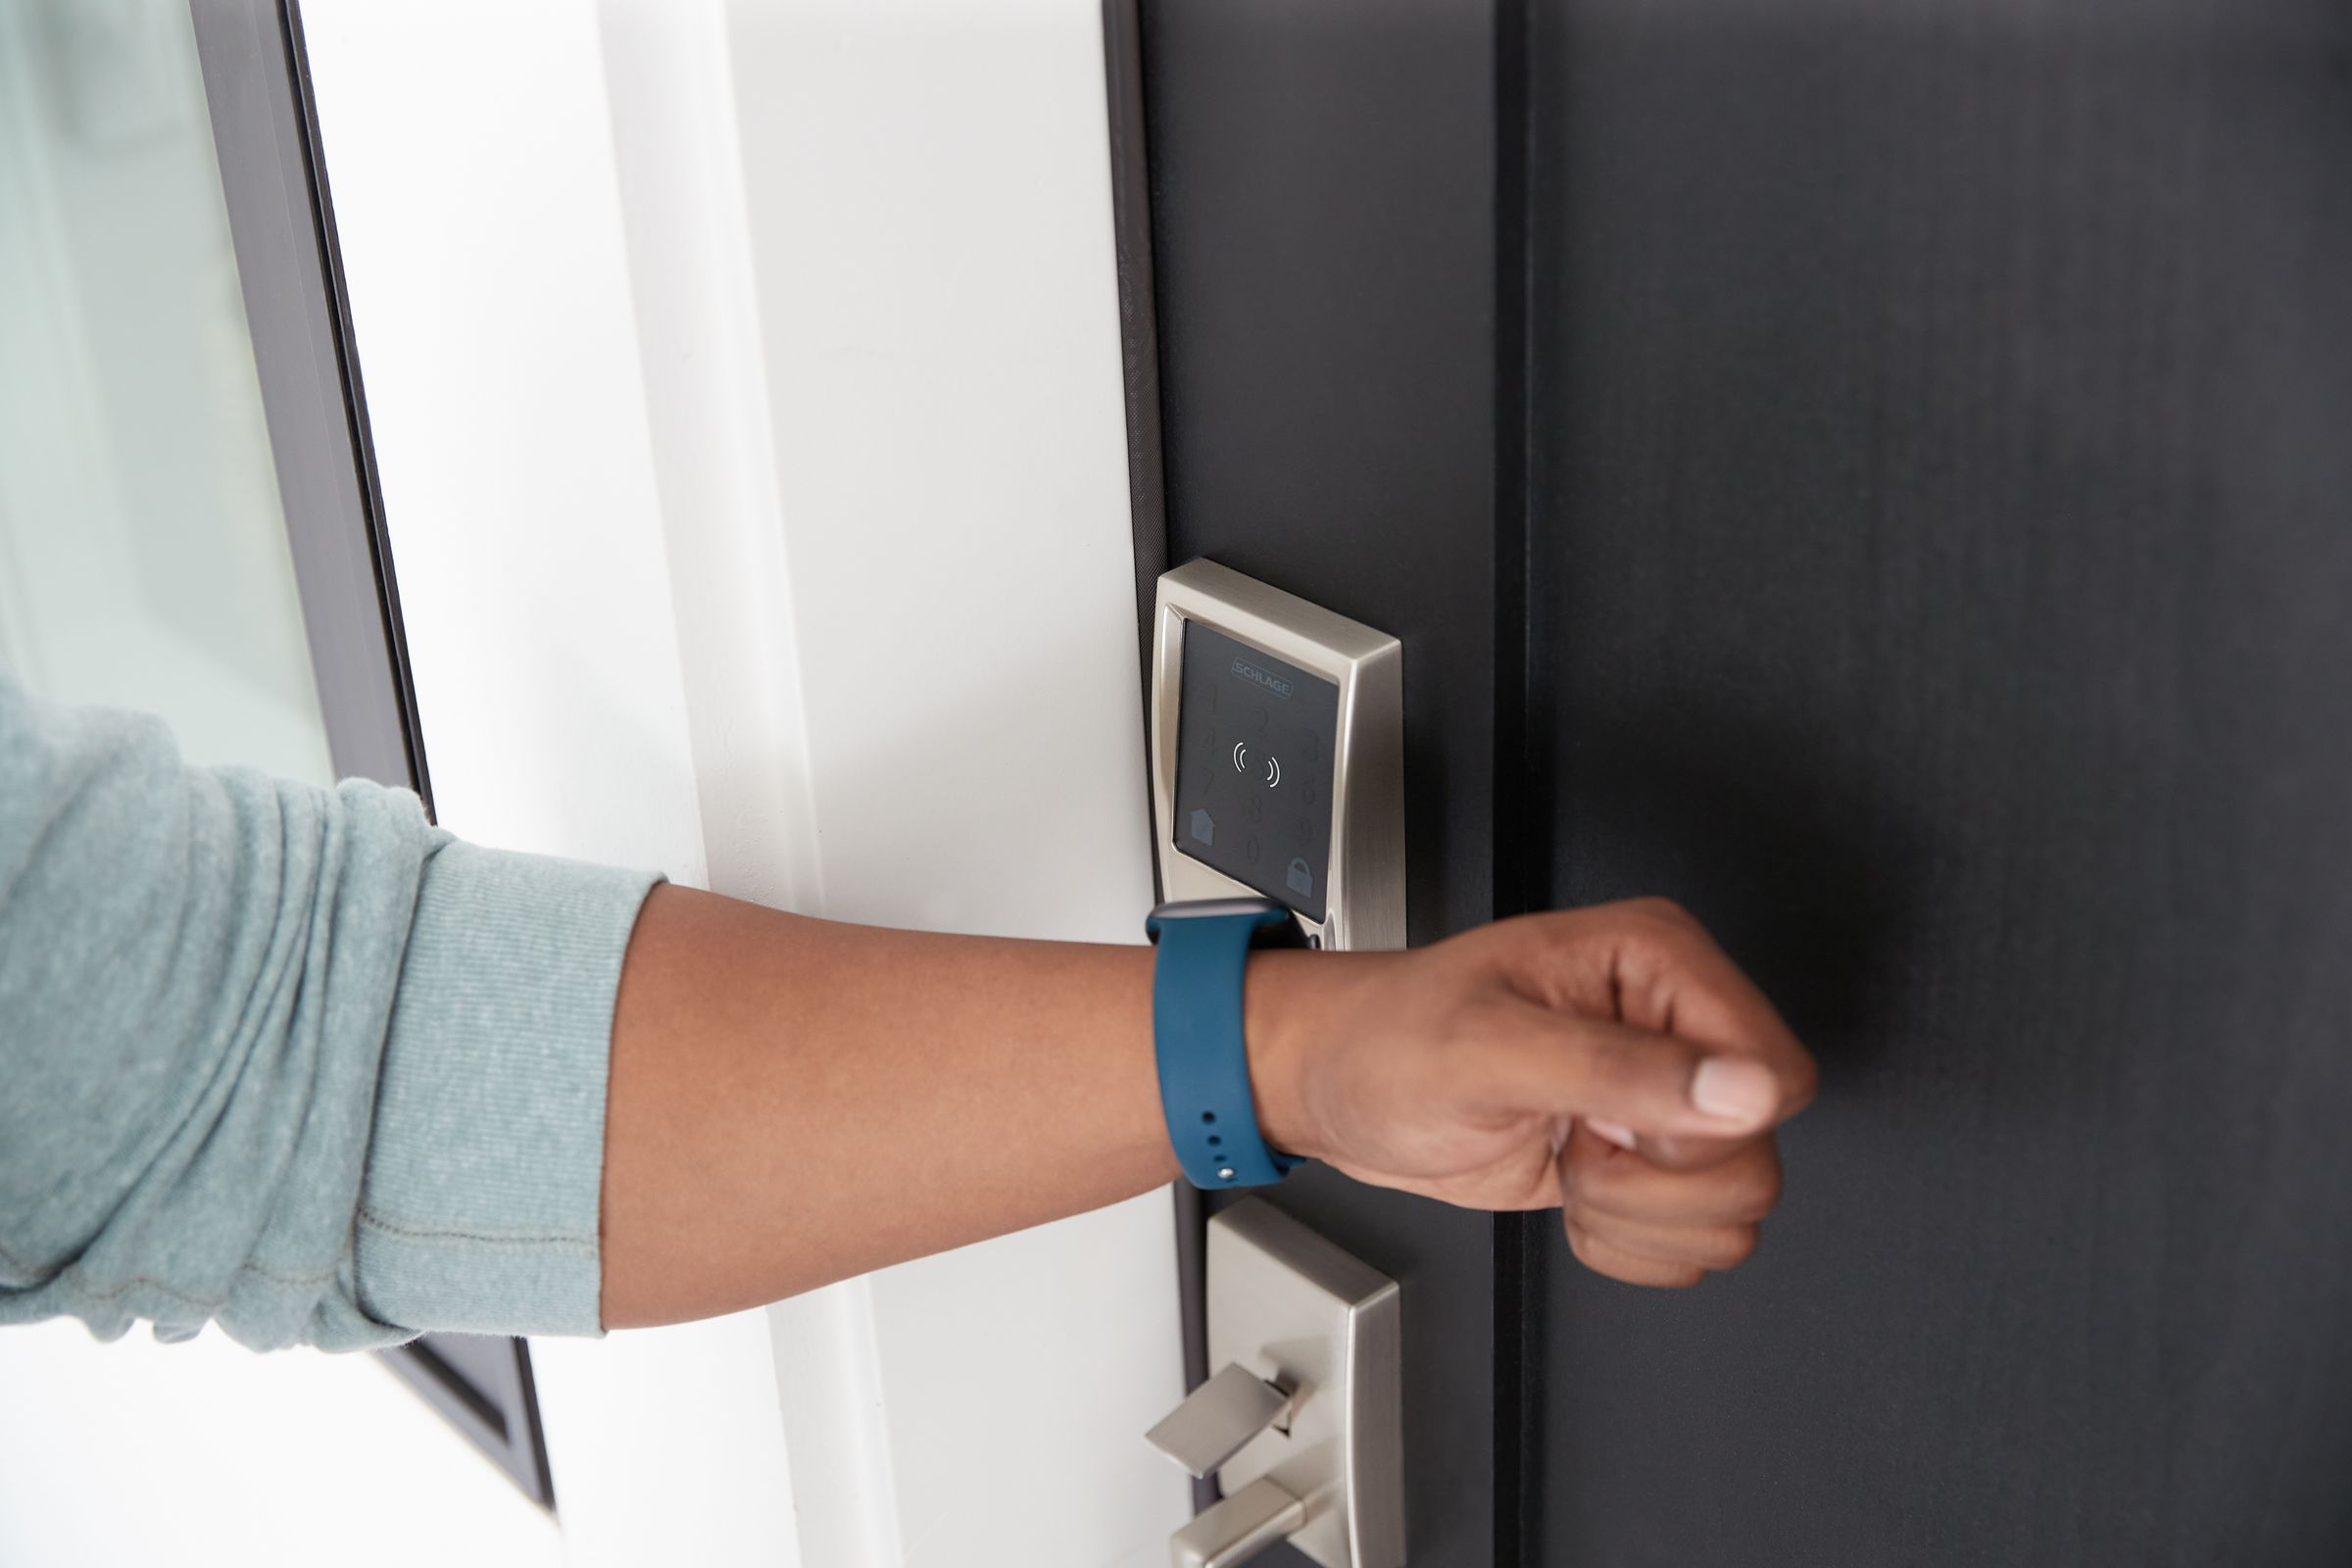 When paired with home key, the Schlage lock can be controlled using just your Apple Watch.